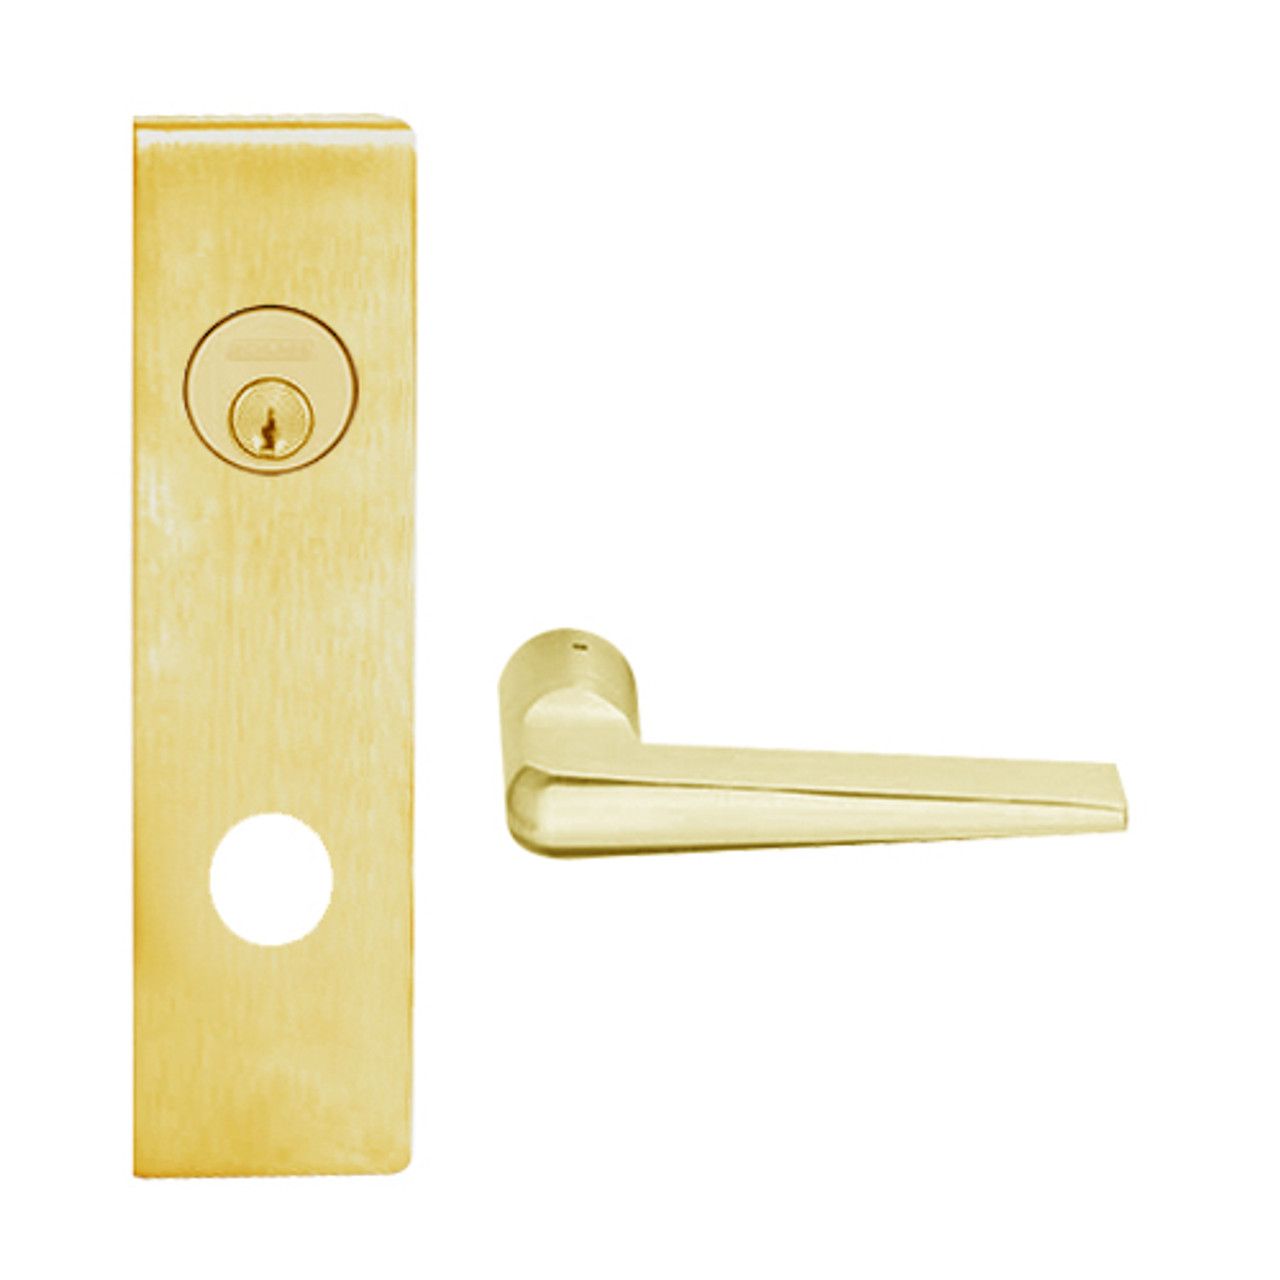 L9453L-05N-605 Schlage L Series Less Cylinder Entrance with Deadbolt Commercial Mortise Lock with 05 Cast Lever Design in Bright Brass